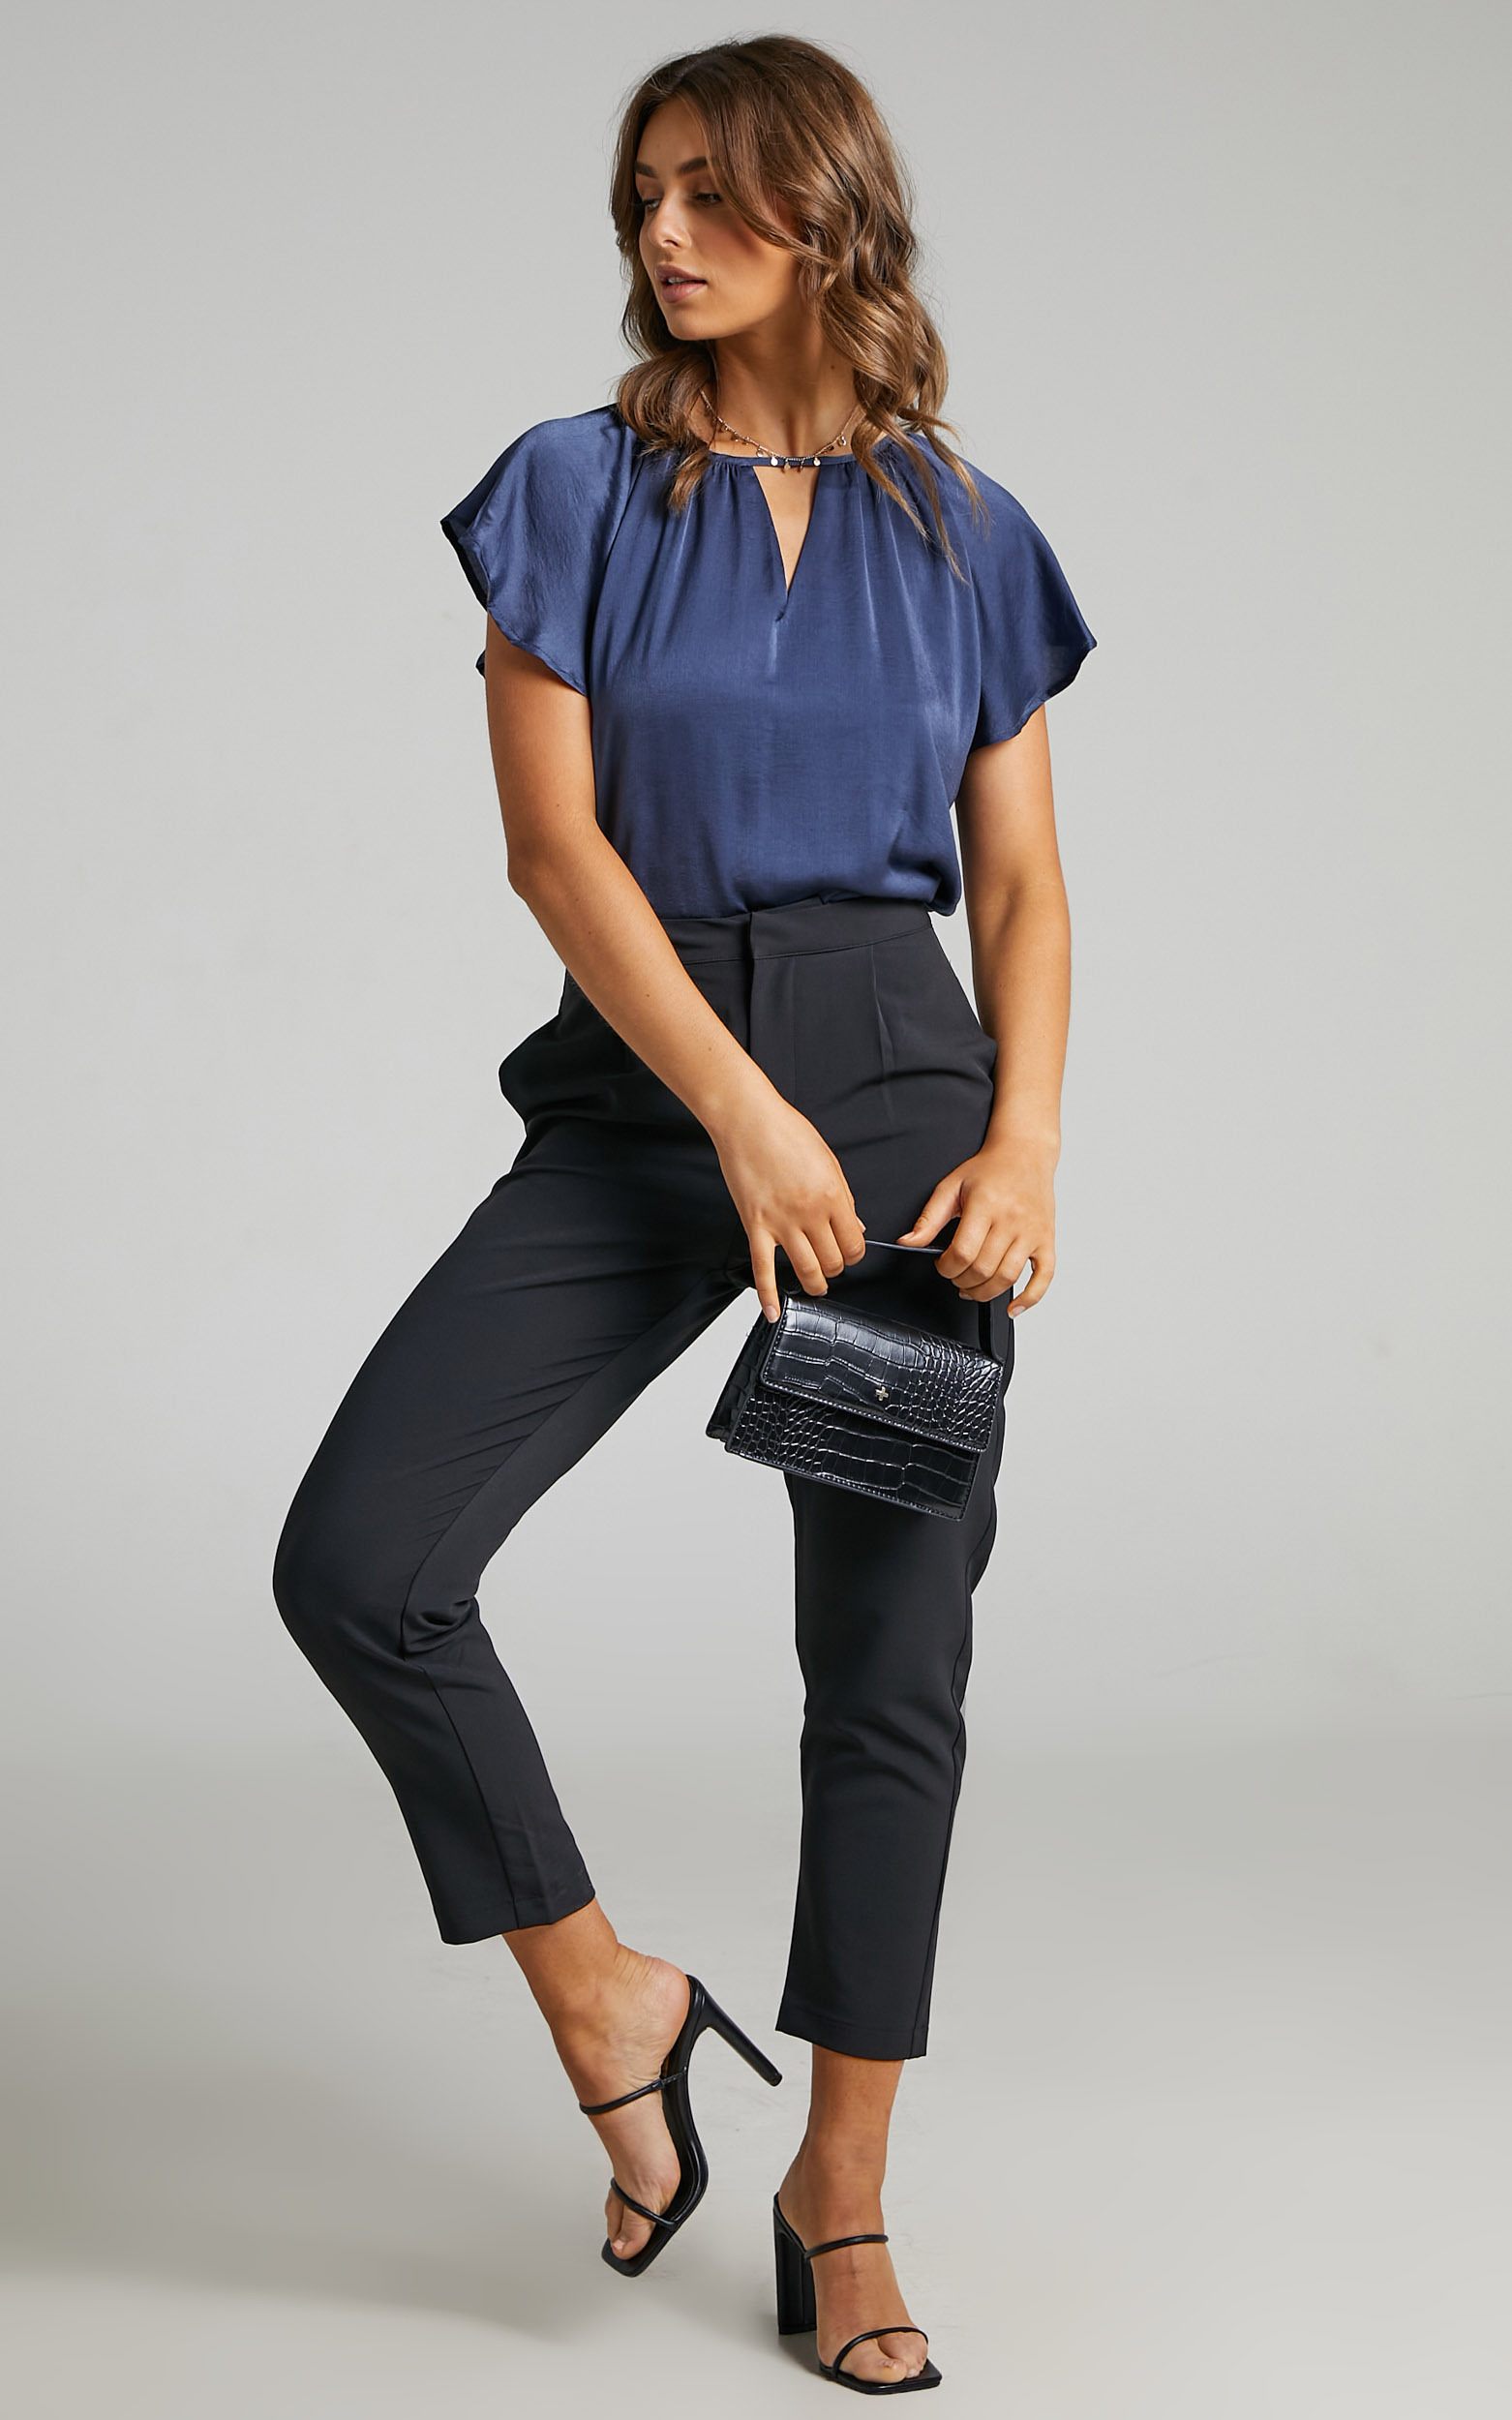 Demmi Key Hole Flutter Sleeve Top in Navy - 04, NVY2, hi-res image number null